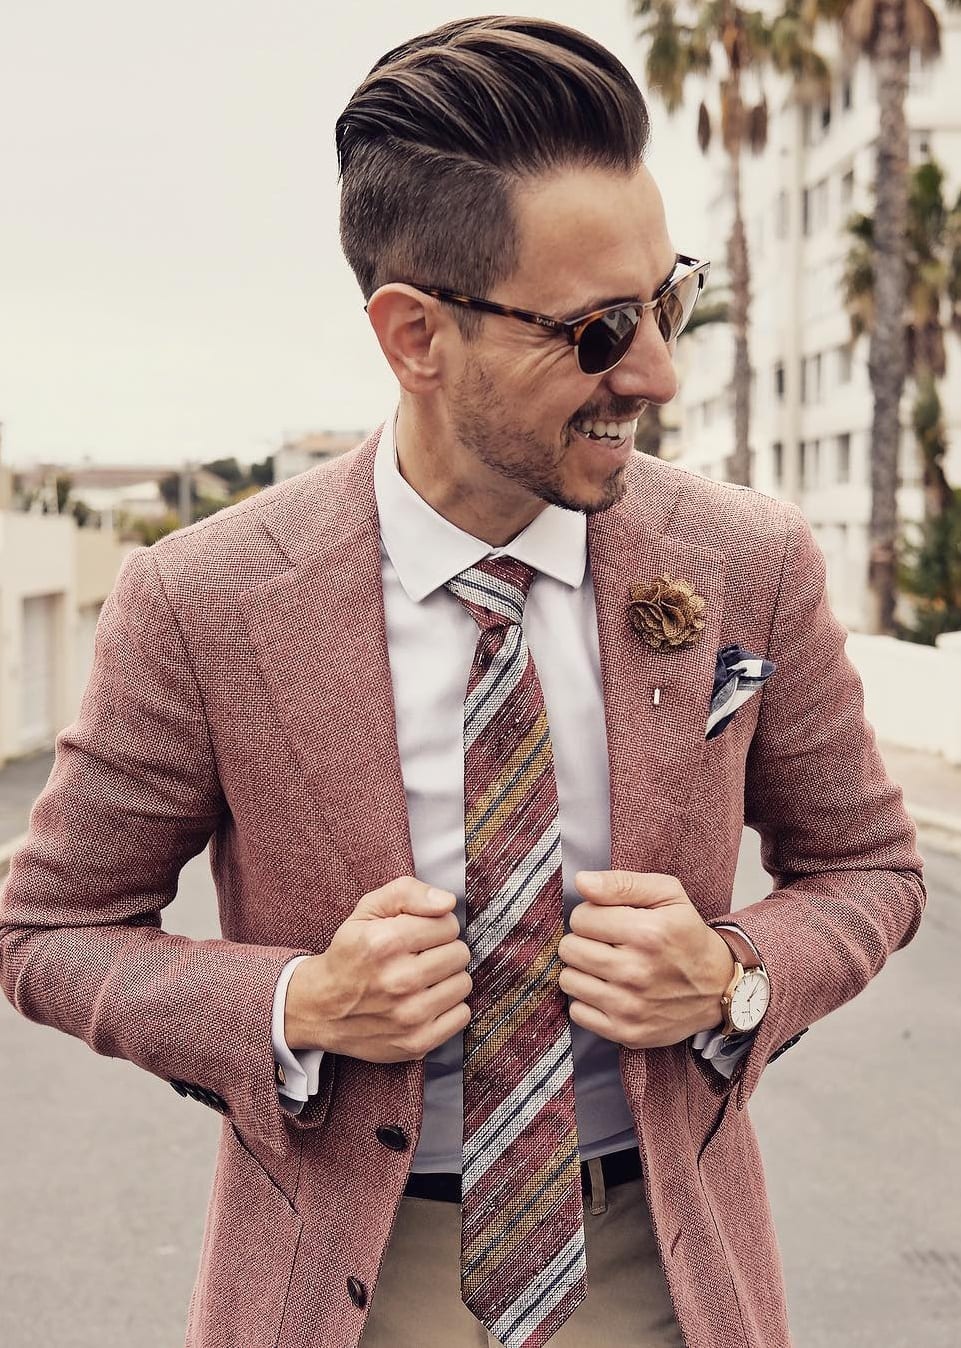 10 Stunning and Stylish Ties for Men